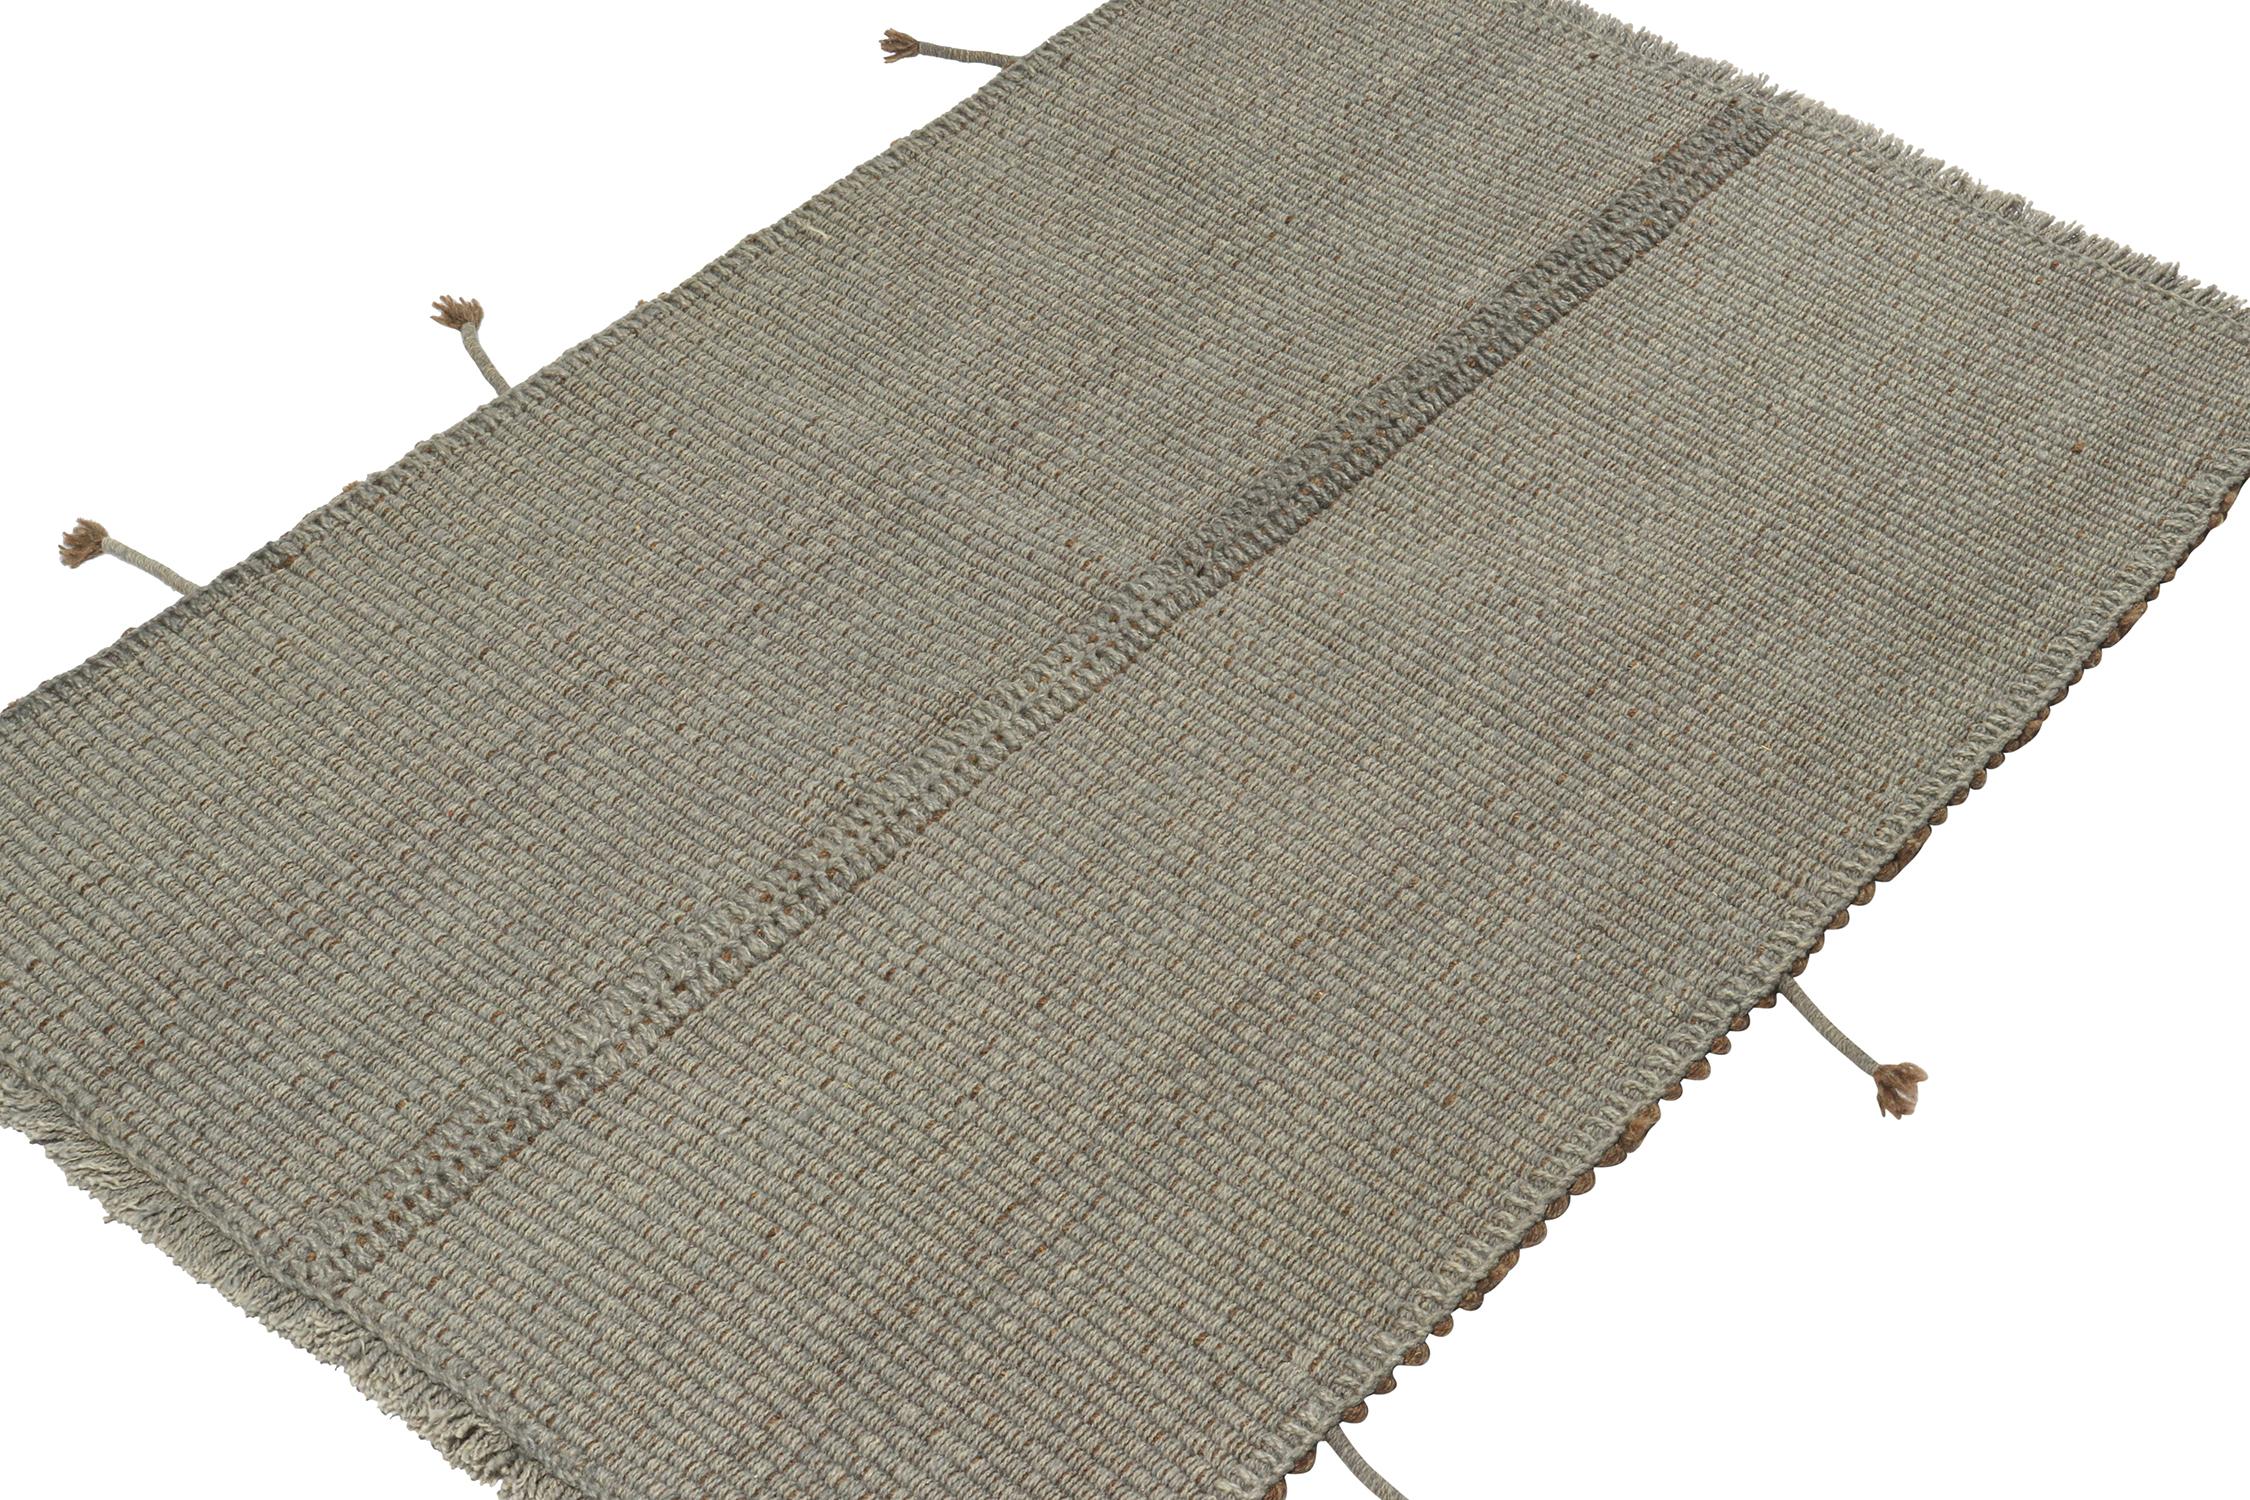 Handwoven in wool, a 3x4 Kilim from a bold, artisan line of contemporary flatweaves by Rug & Kilim.


On the Design:

This “Rez Kilim” piece enjoys a more durable take on classic panel-woven style in handsome gray hues with brown accents.